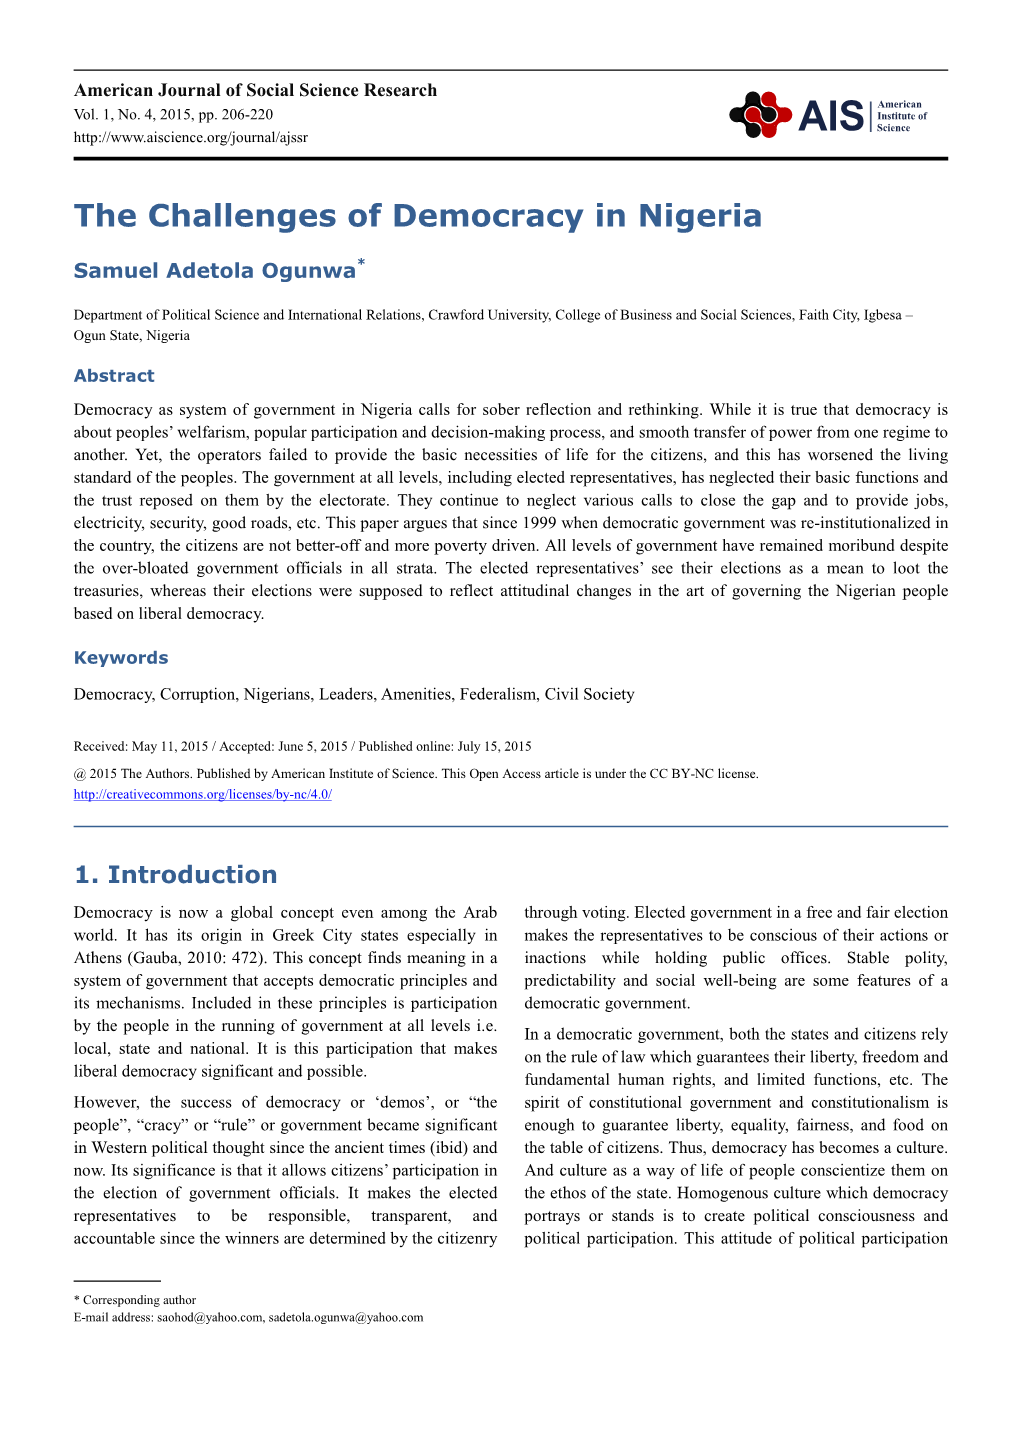 The Challenges of Democracy in Nigeria